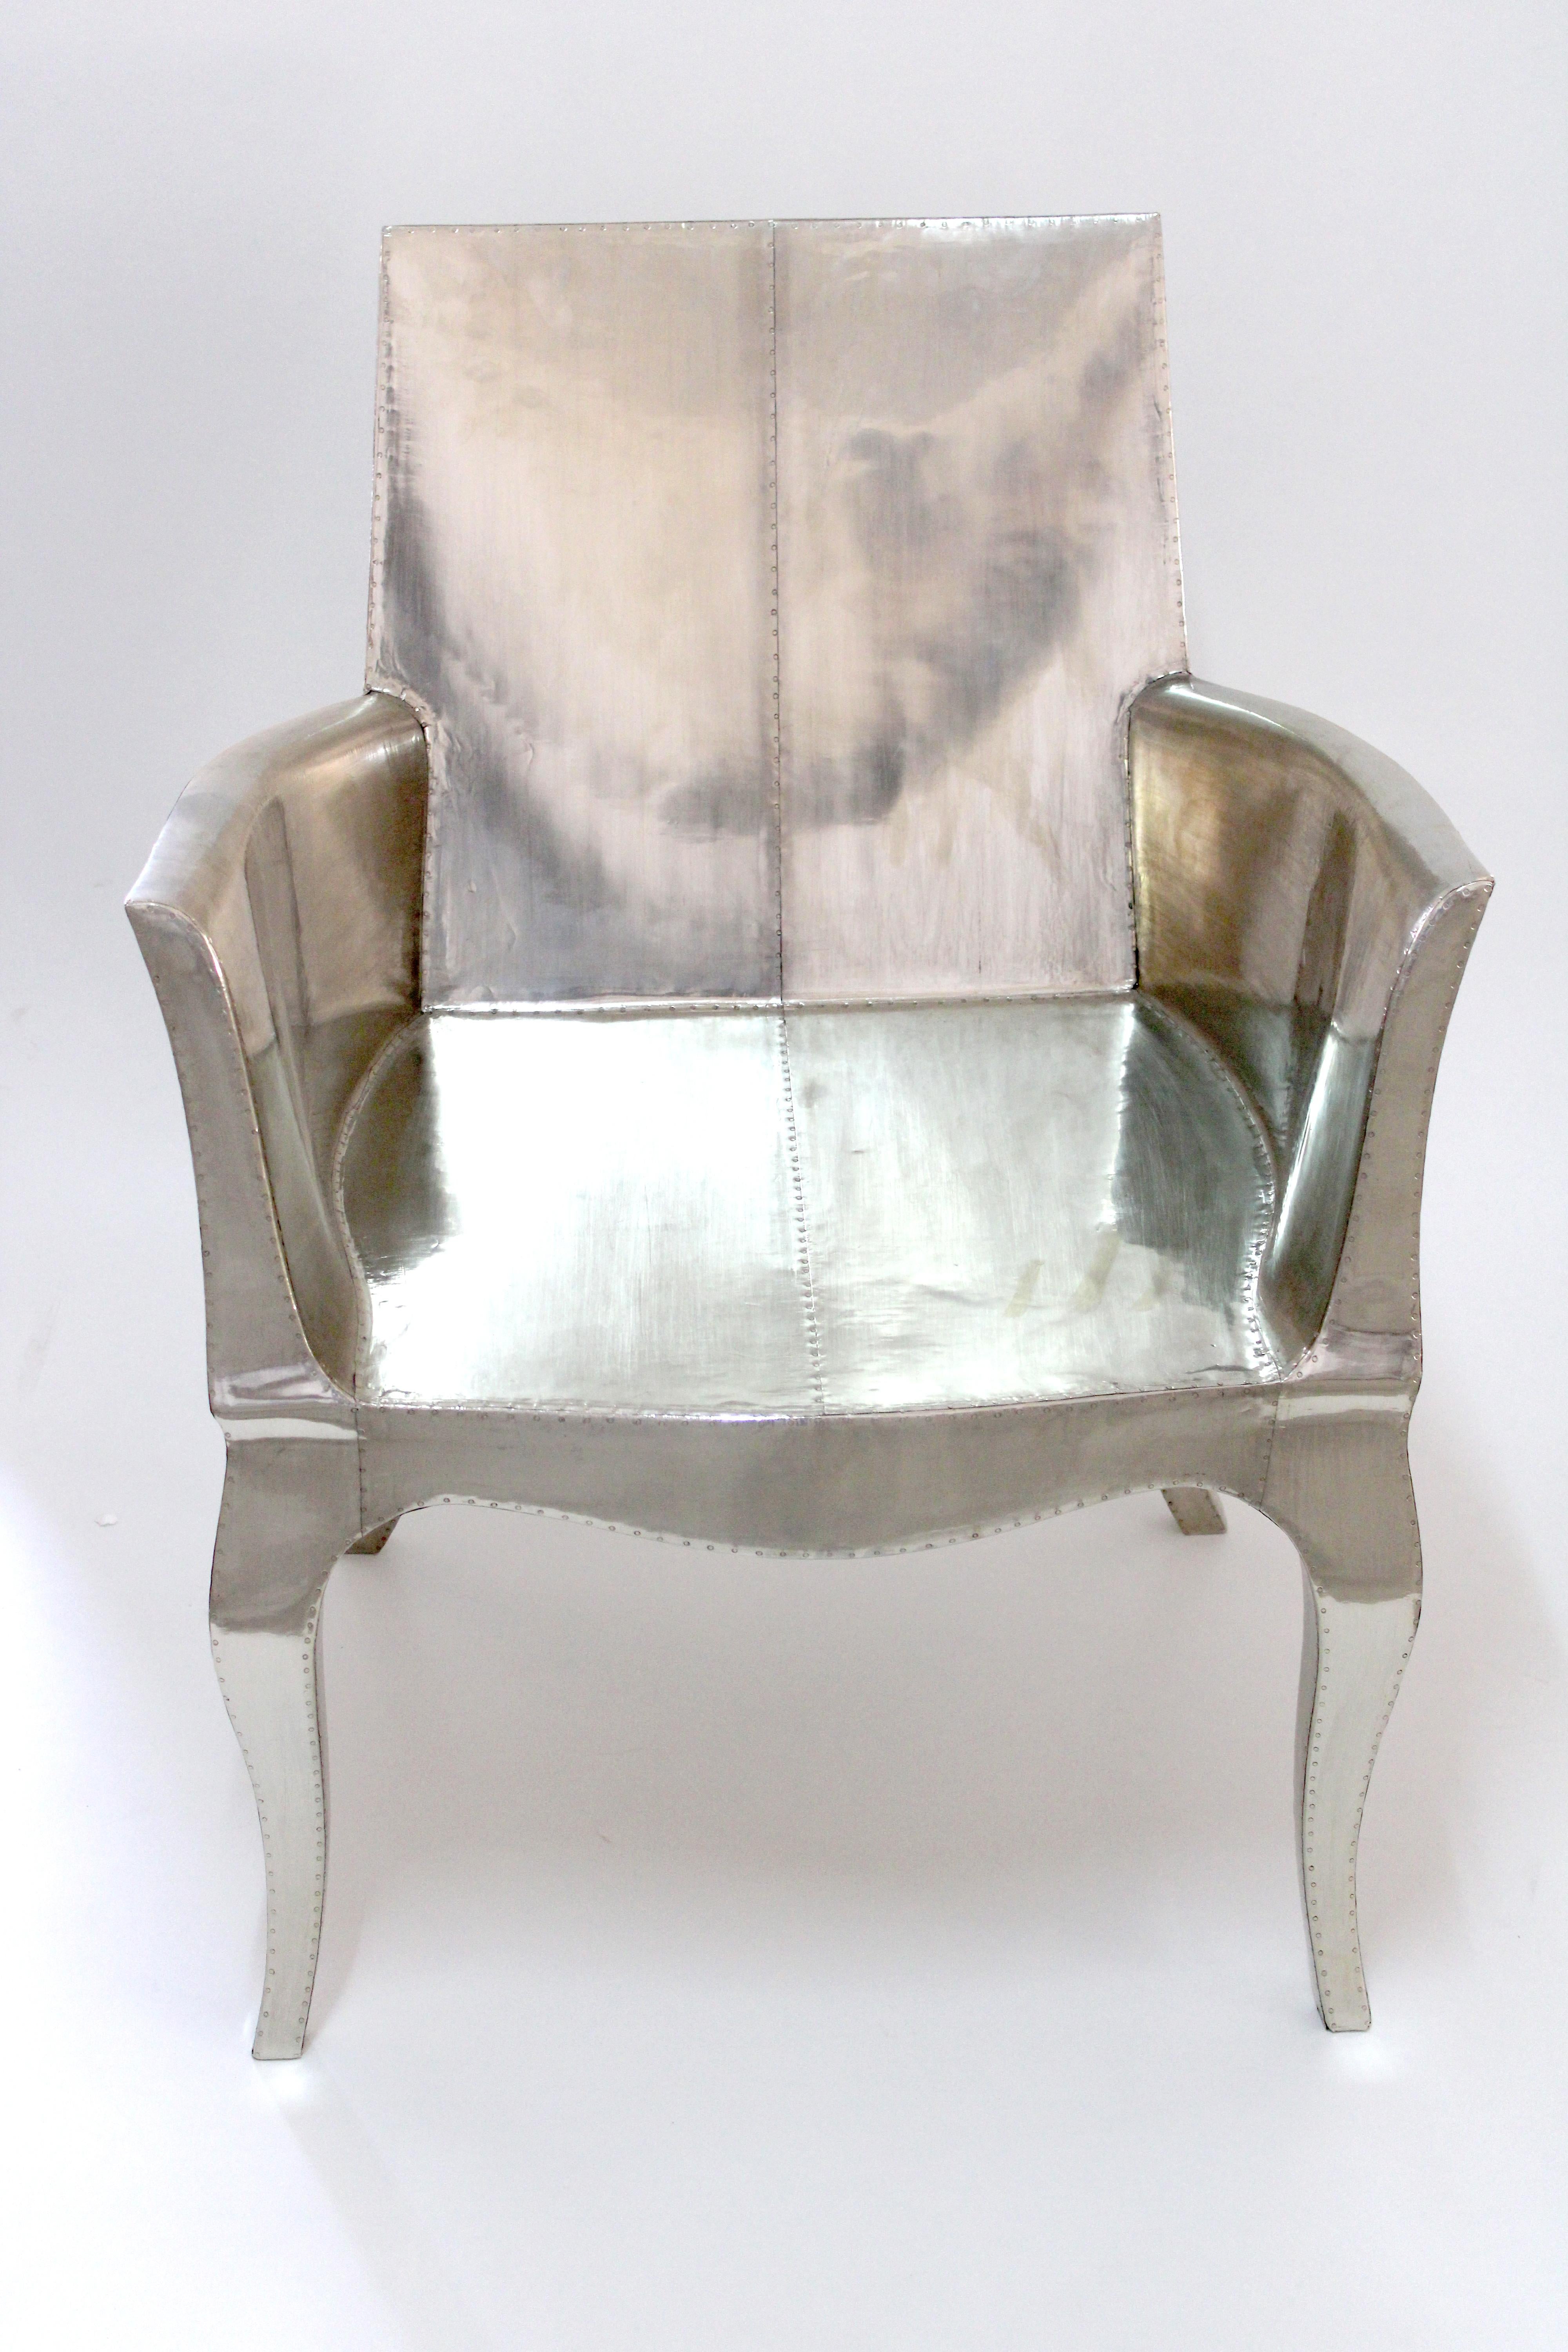 Sheet Metal Art Deco Desk Chair in Smooth White Bronze by Paul Mathieu for S. Odegard For Sale